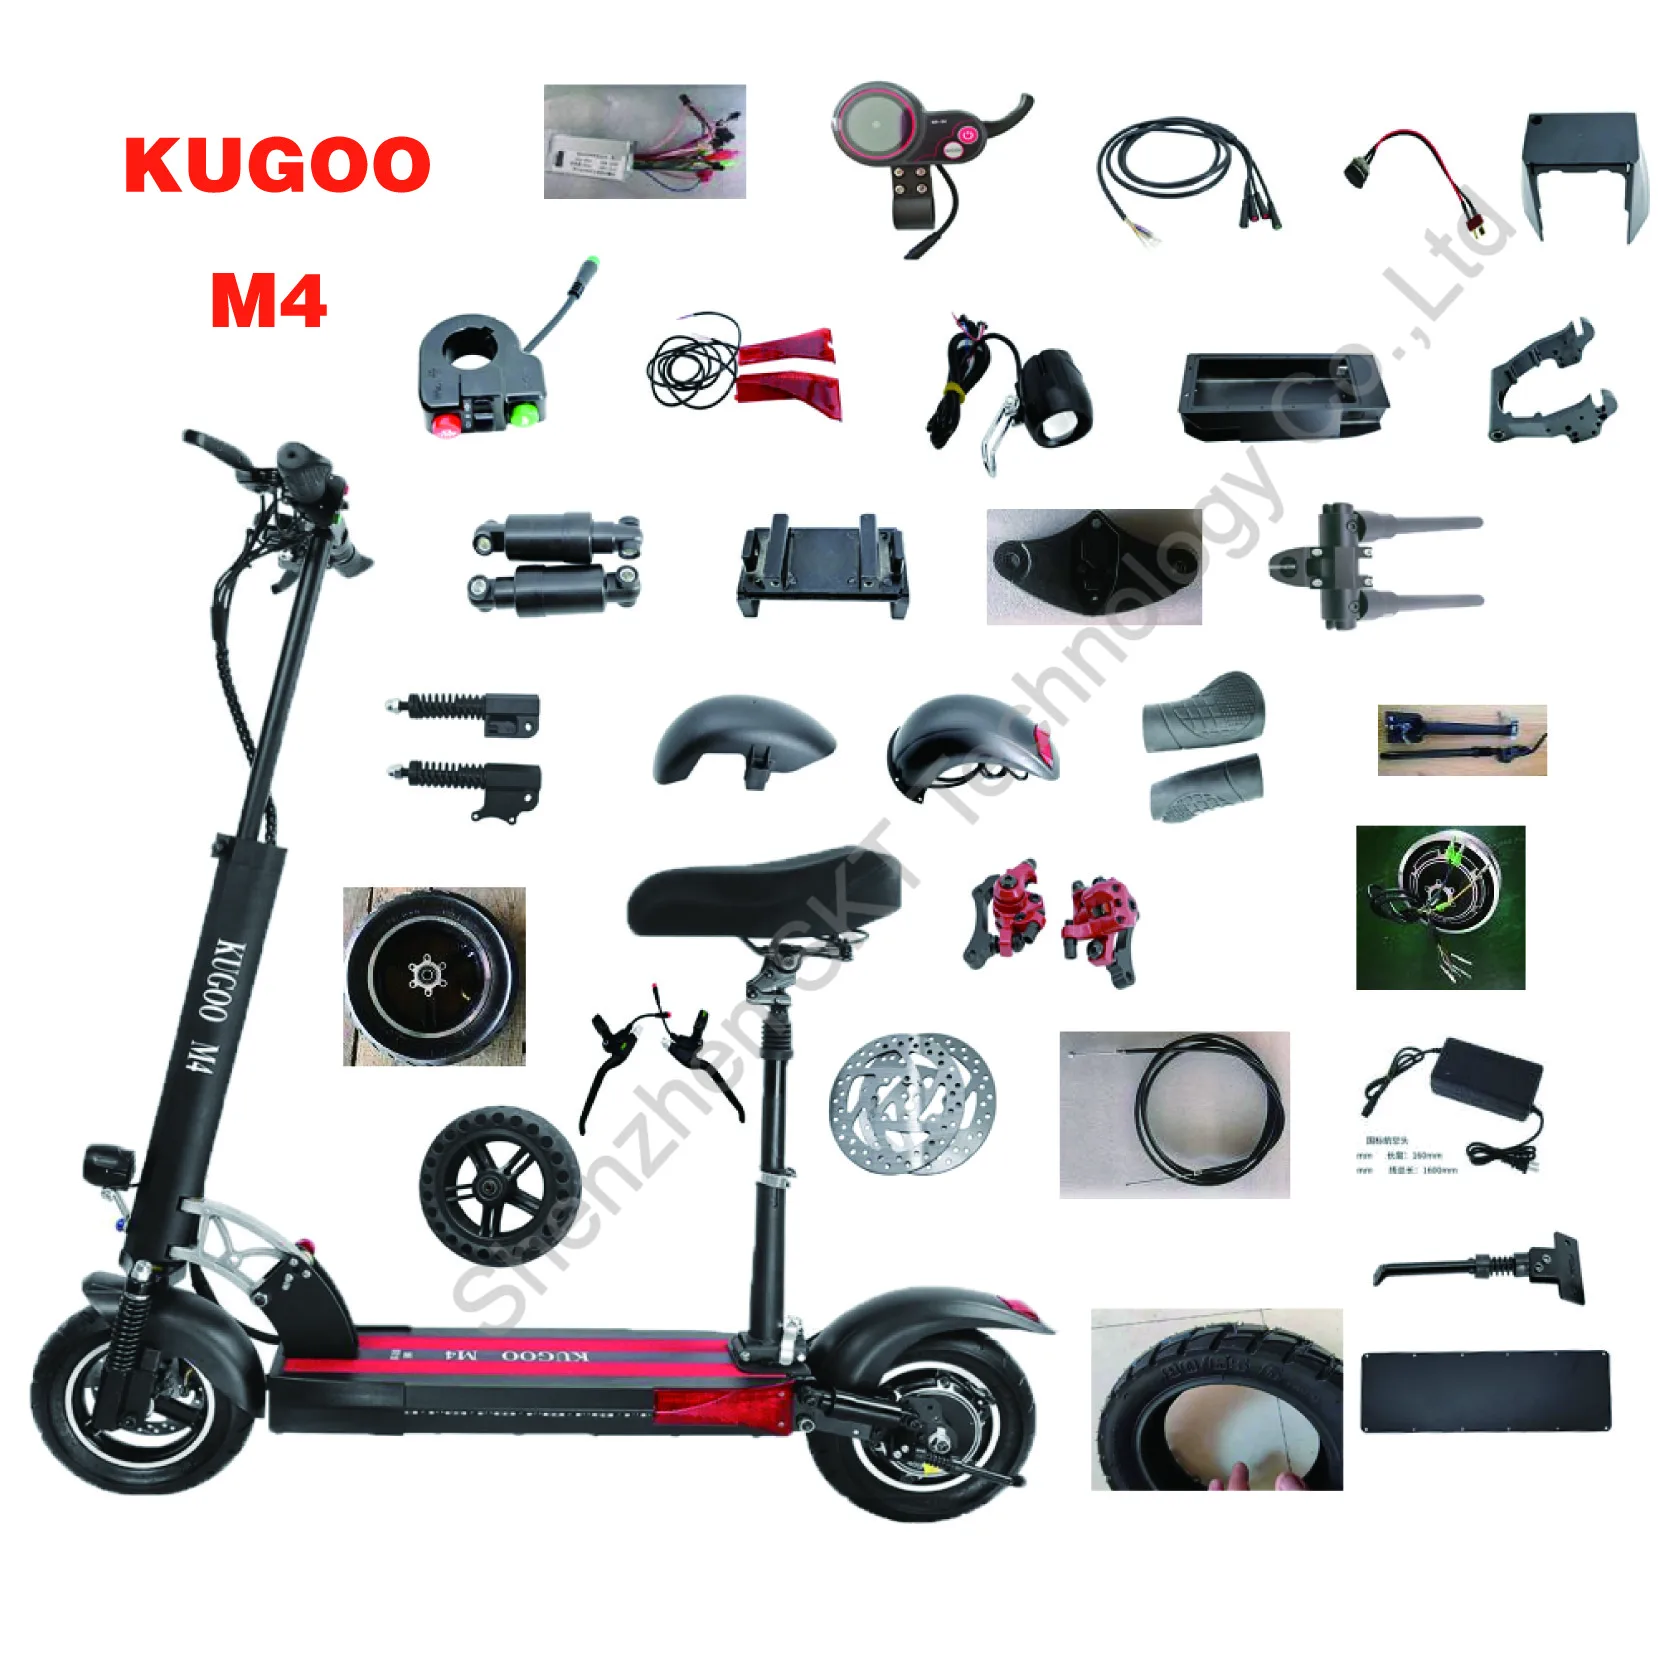 Various Kugoo E-Scooter Parts Electric Scooter Kugoo 1S M4 Repair Parts Accessories From m.alibaba.com